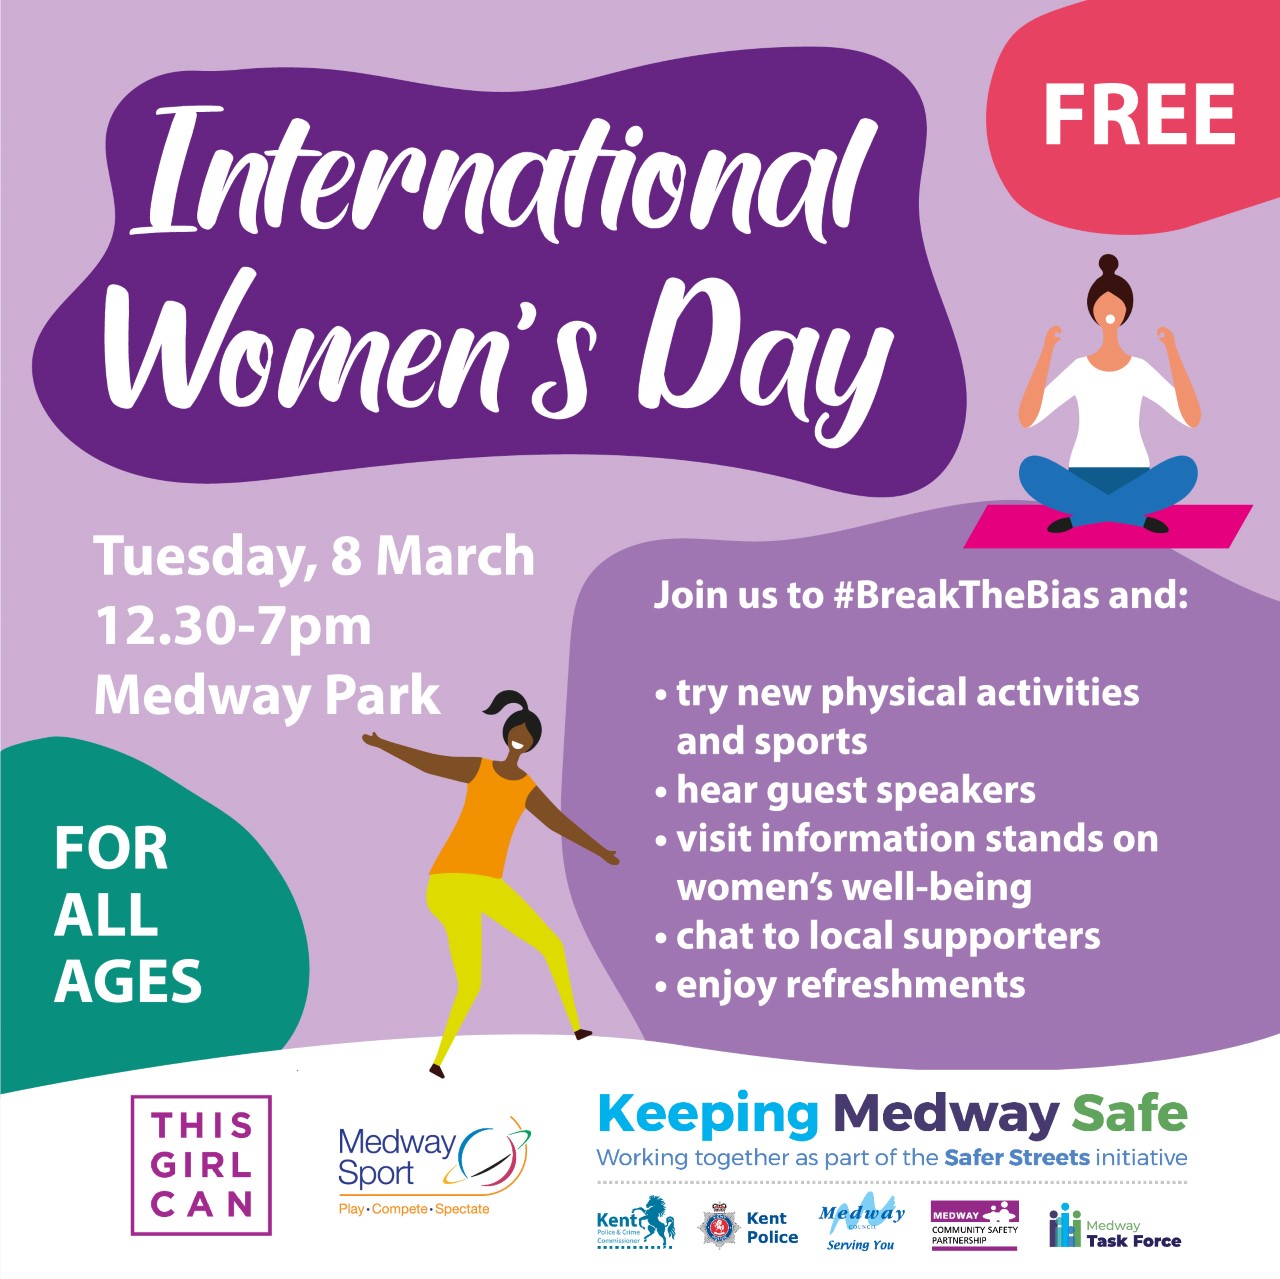 International Women’s Day – Tuesday, 8th March